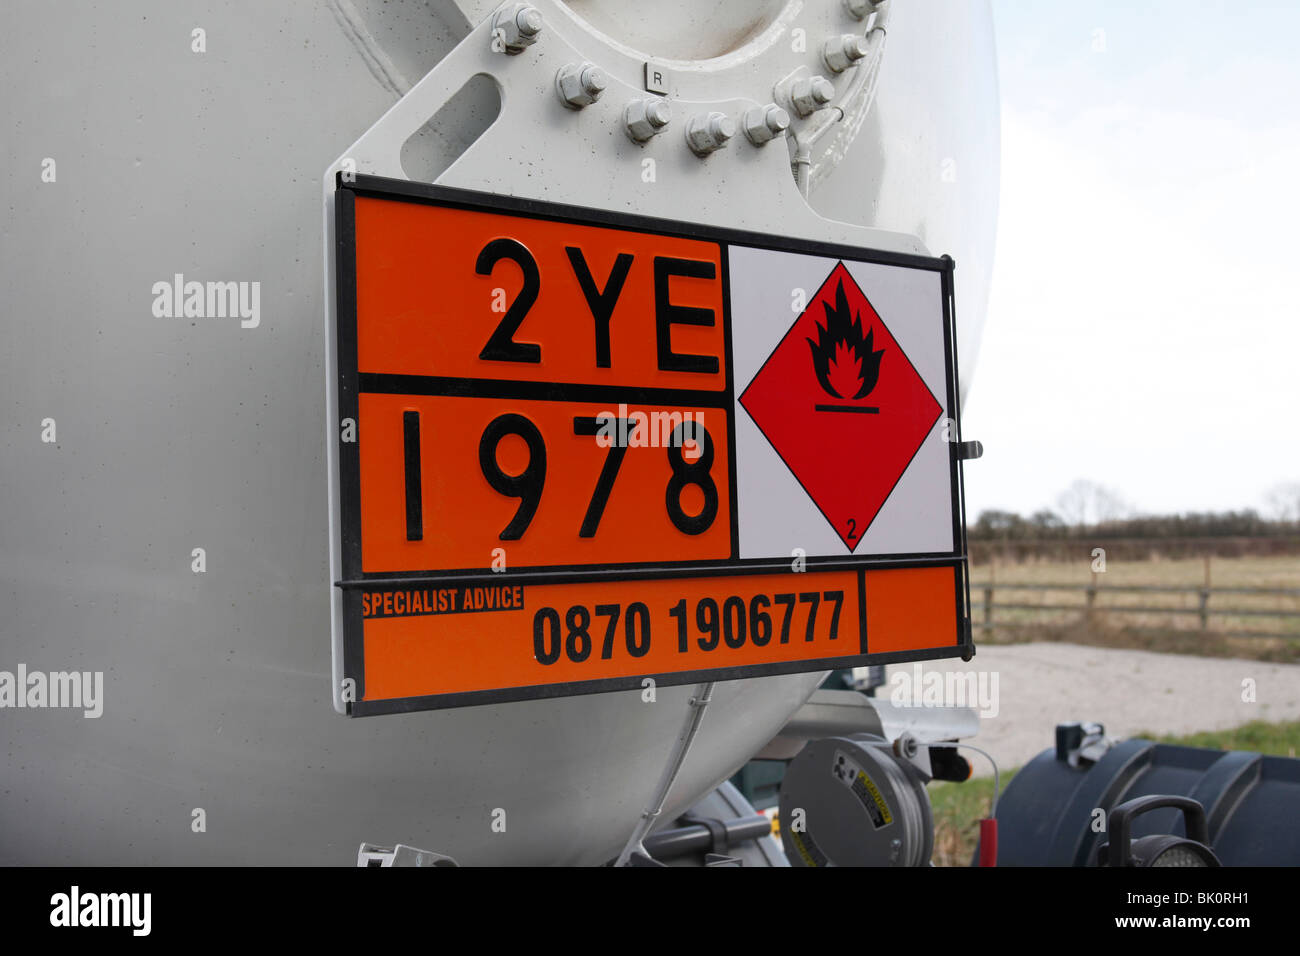 Safety sign on a road tanker Stock Photo